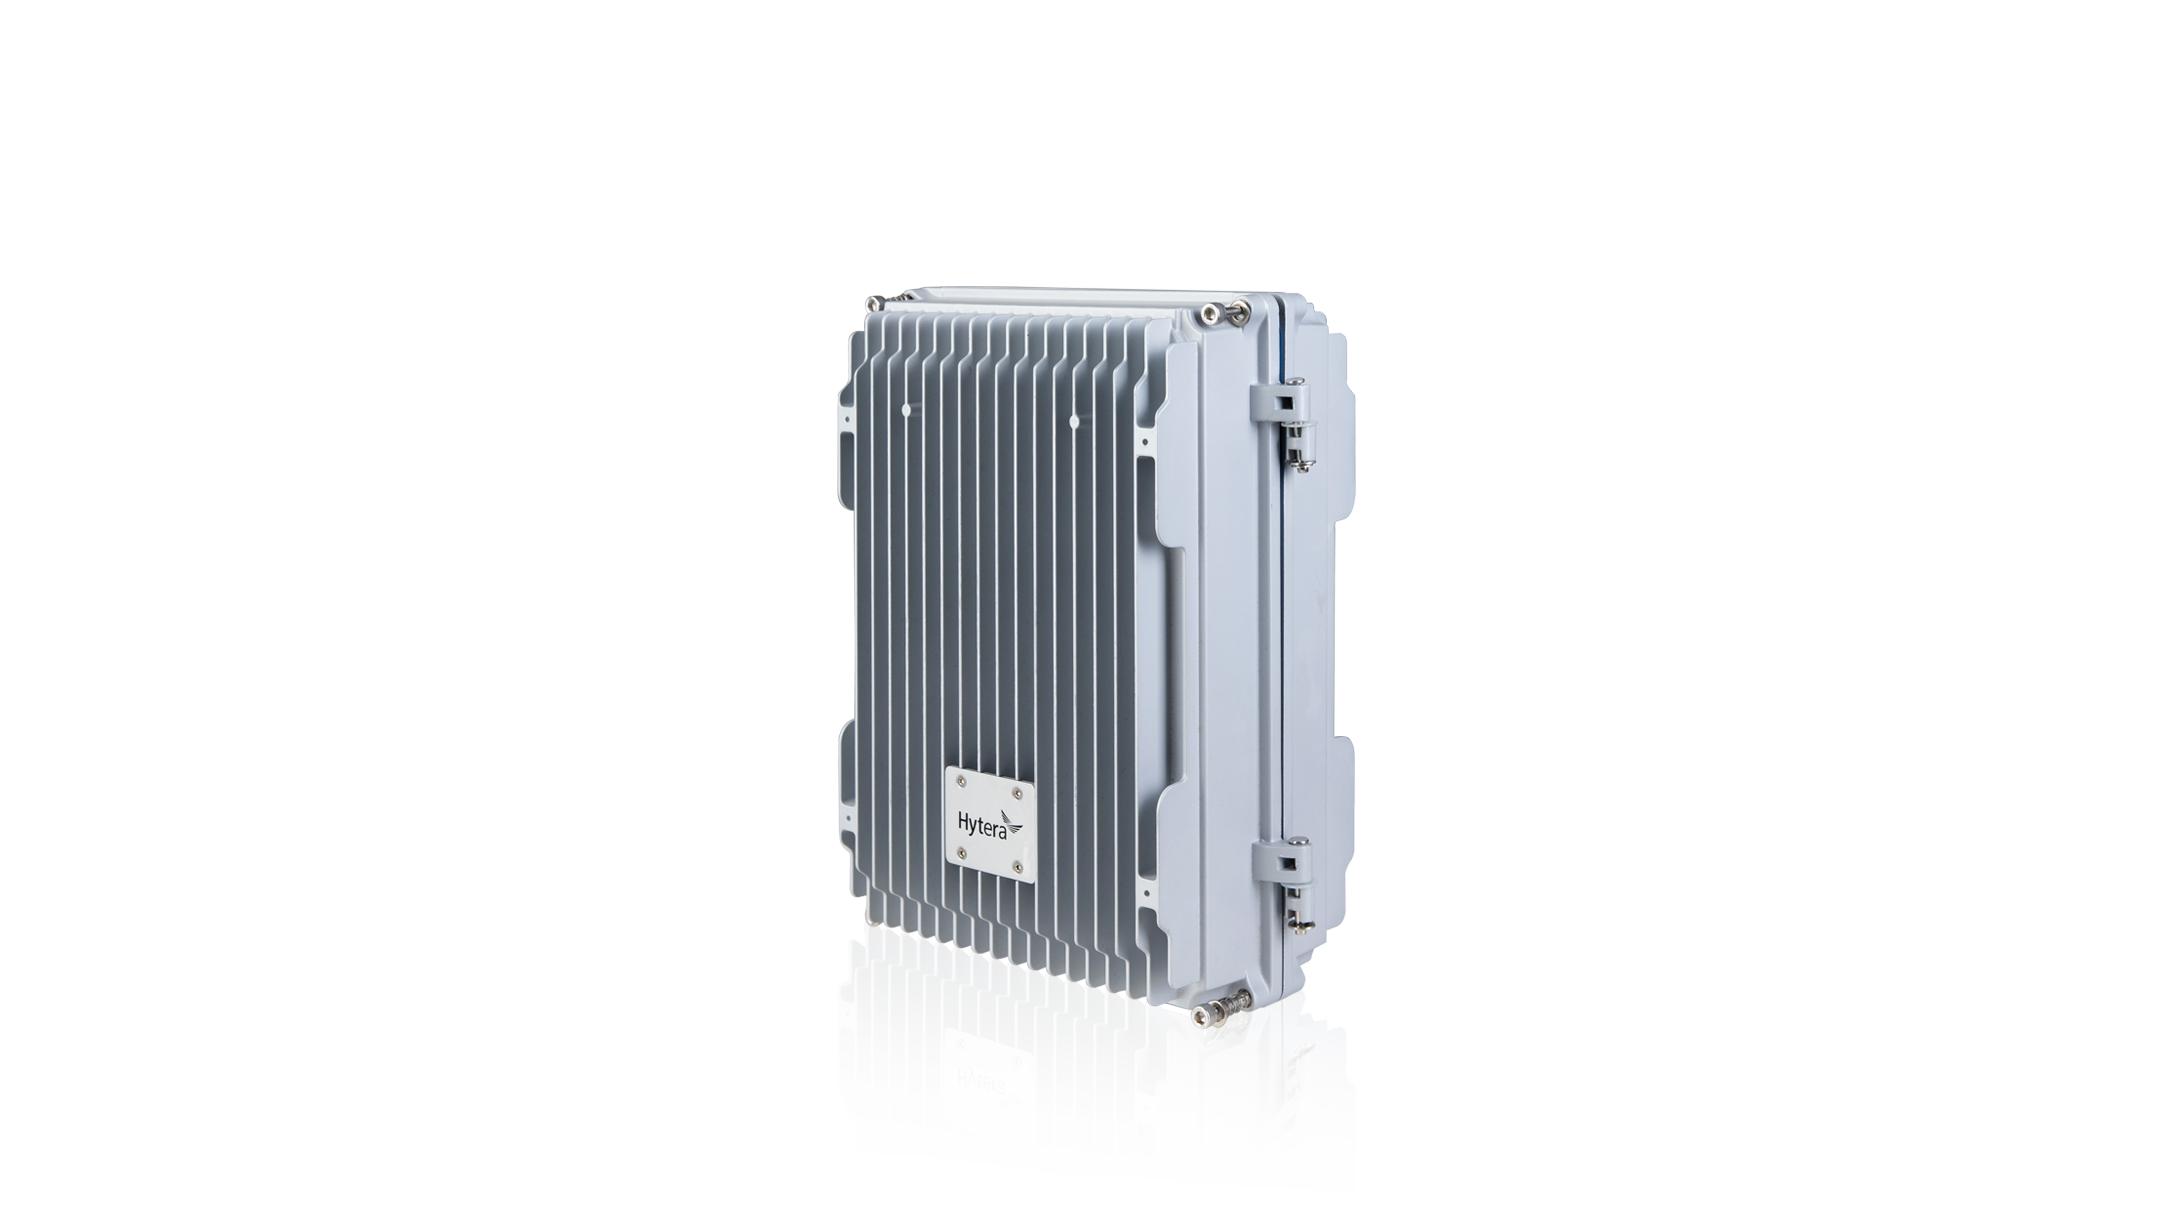 E-pole100-S DMR Single-Frequency Repeater